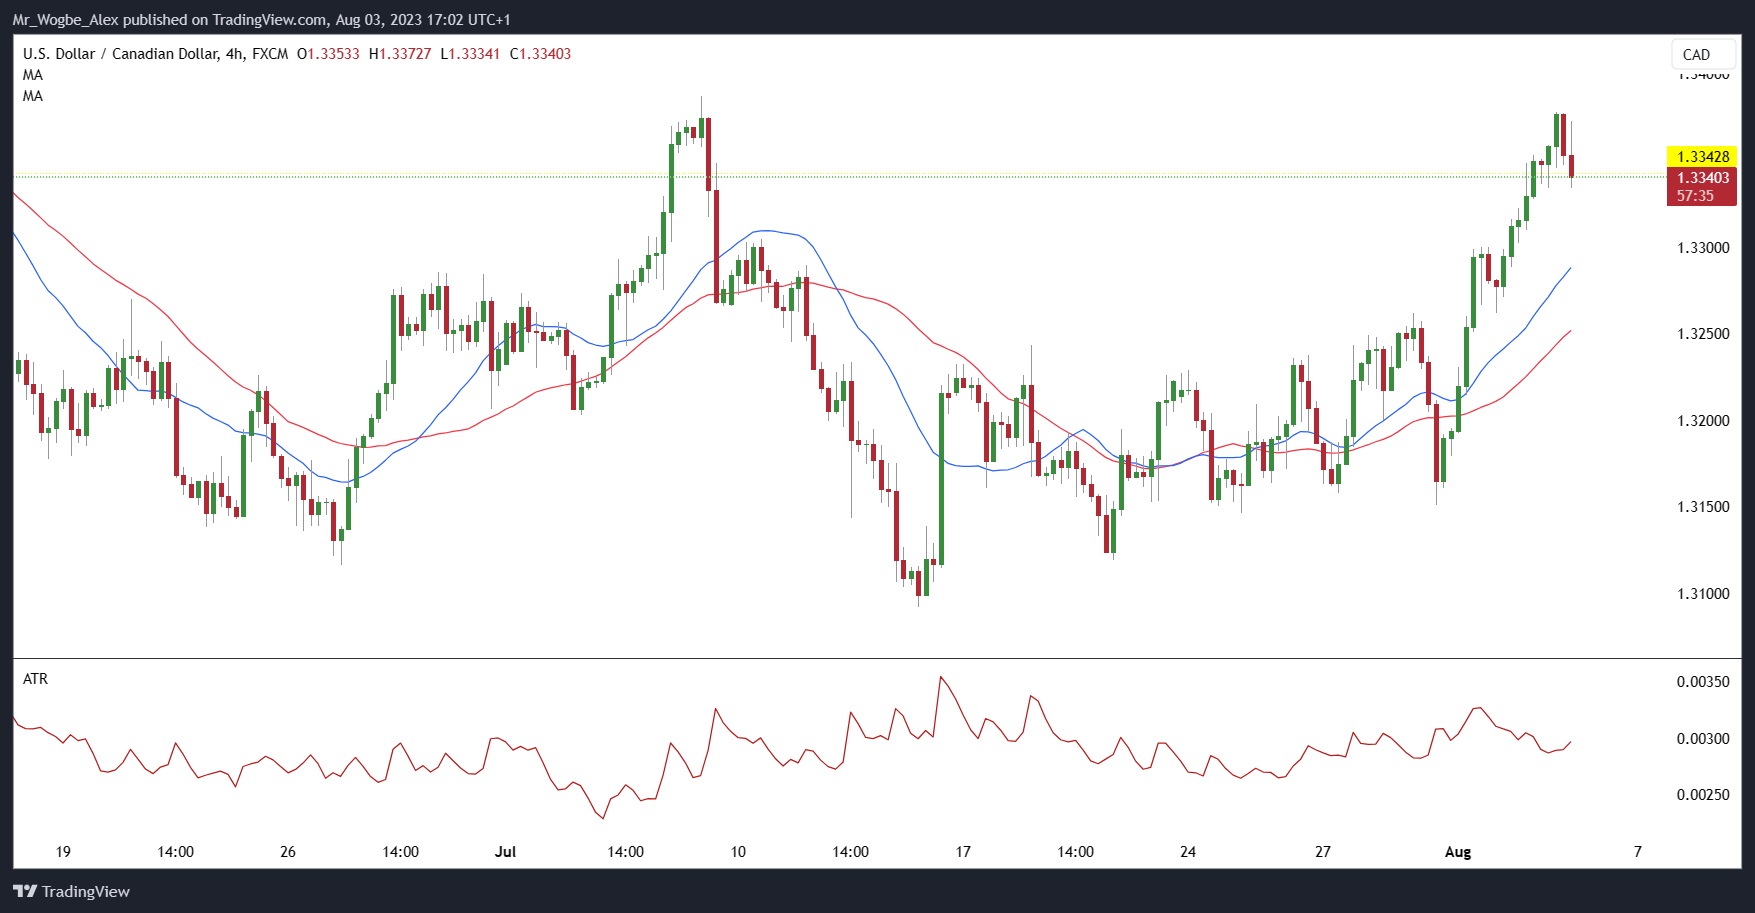 USD/CAD 4-hour Chart from TradingView